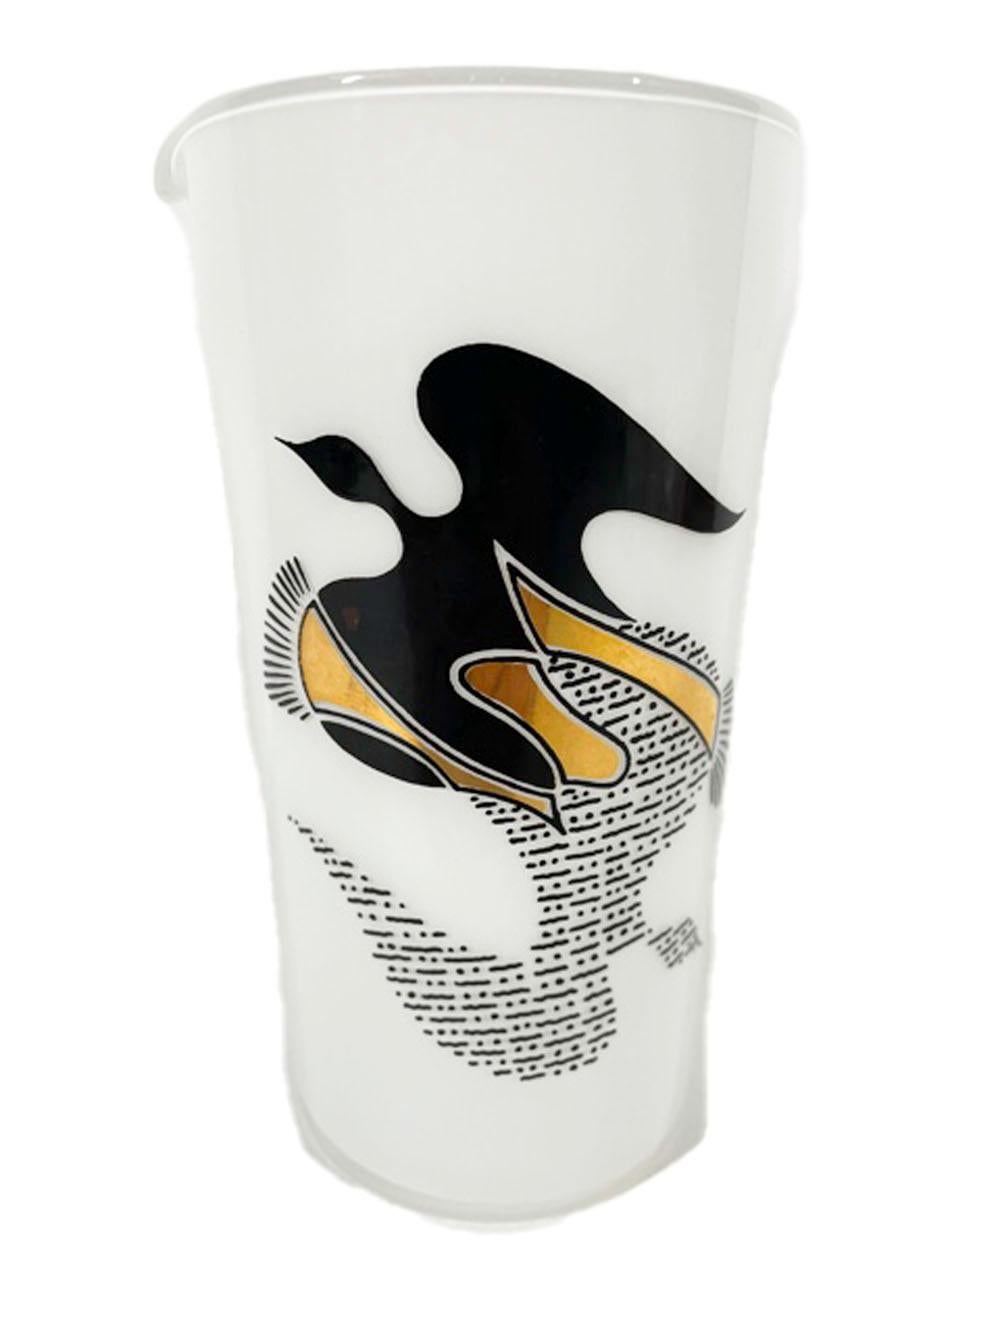 Three-piece Mid-Century Modern cocktail set with a stylized dove in black enamel and 22 karat gold above another in black dots and dashes flying in the opposite direction all on clear glass with white frosted interior. The set consists of a cocktail